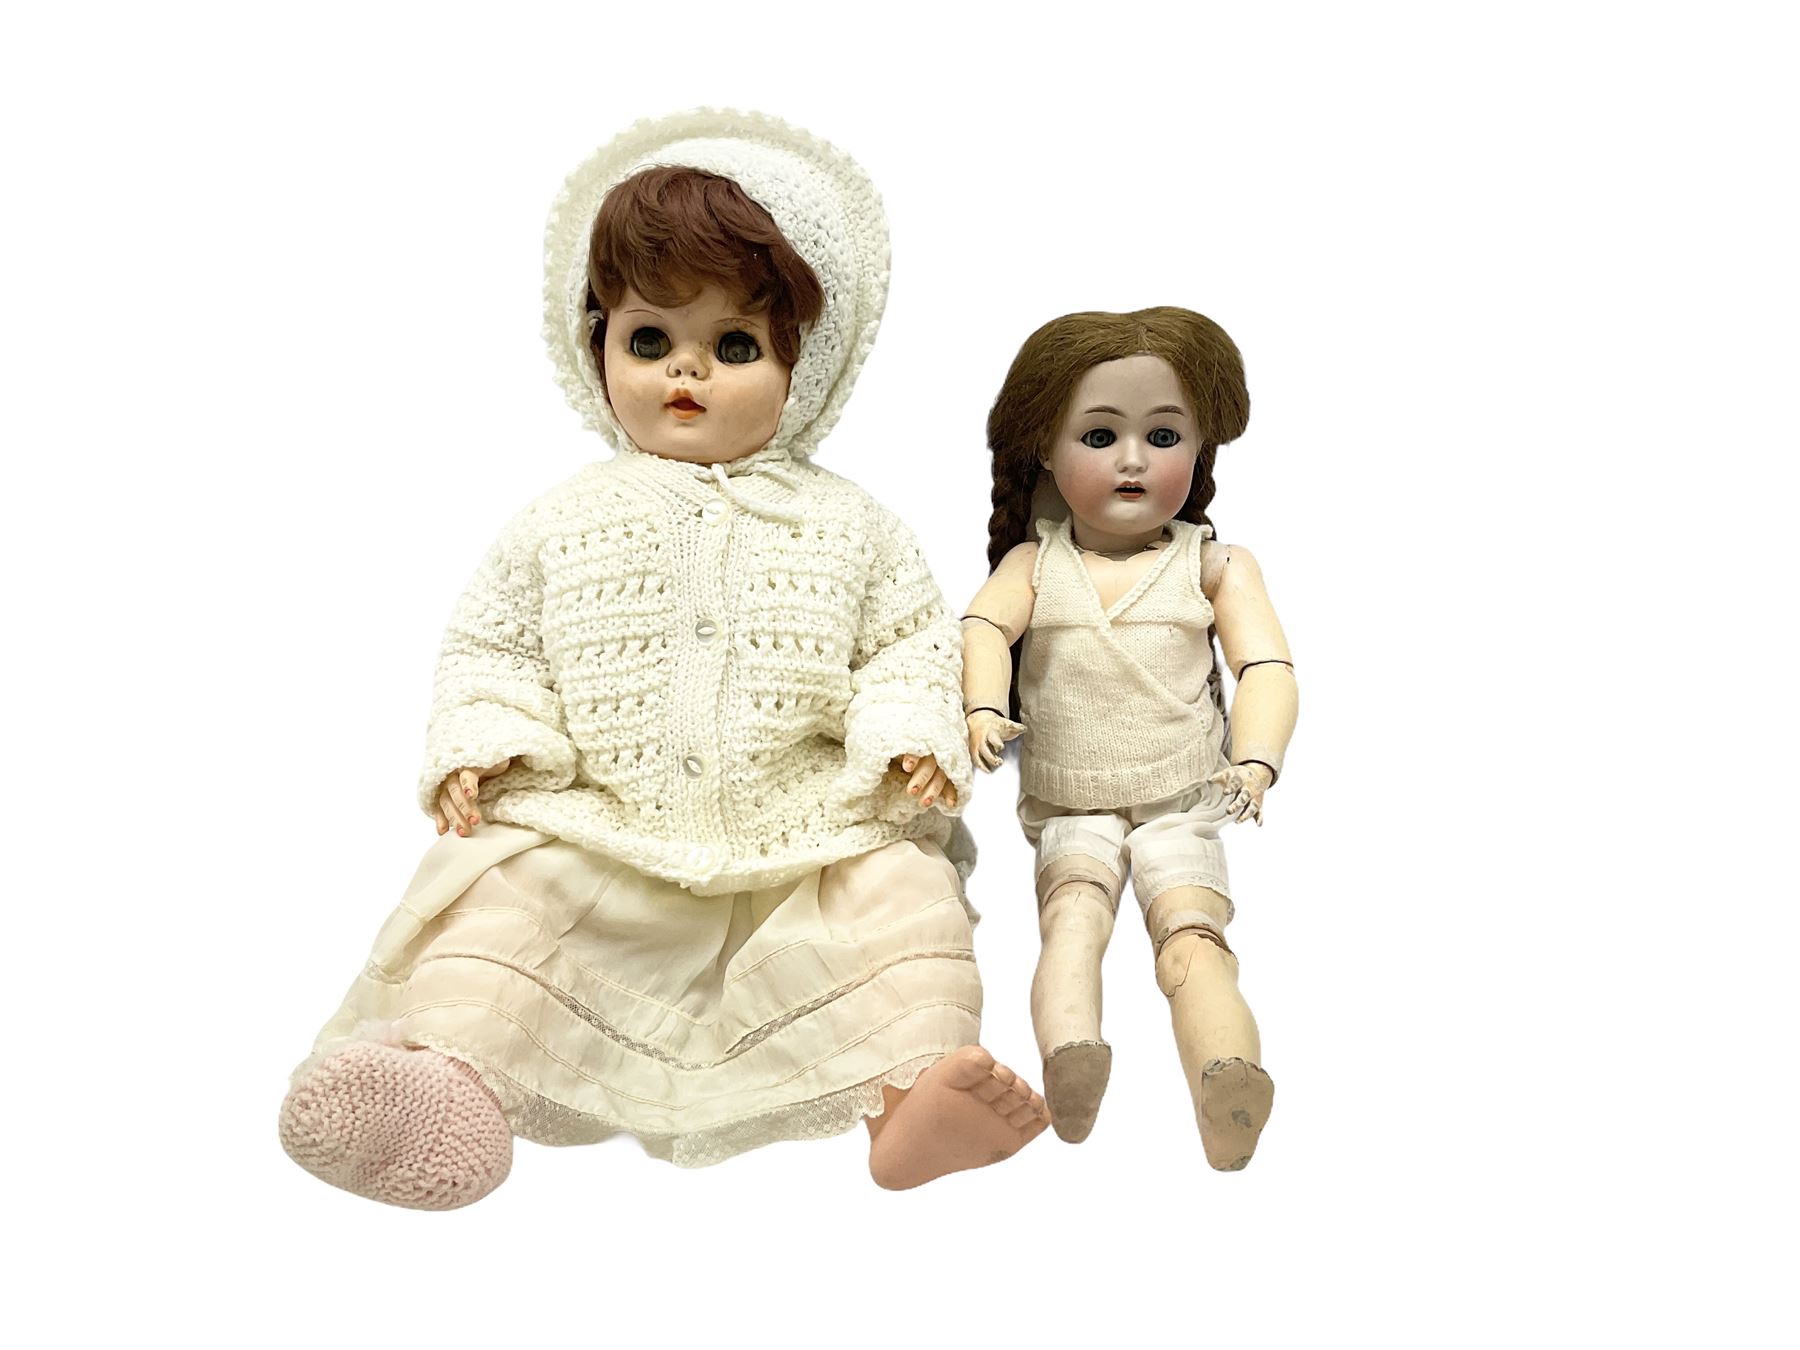 Simon & Halbig for Kammer & Reinhardt bisque head doll with applied hair - Image 2 of 11